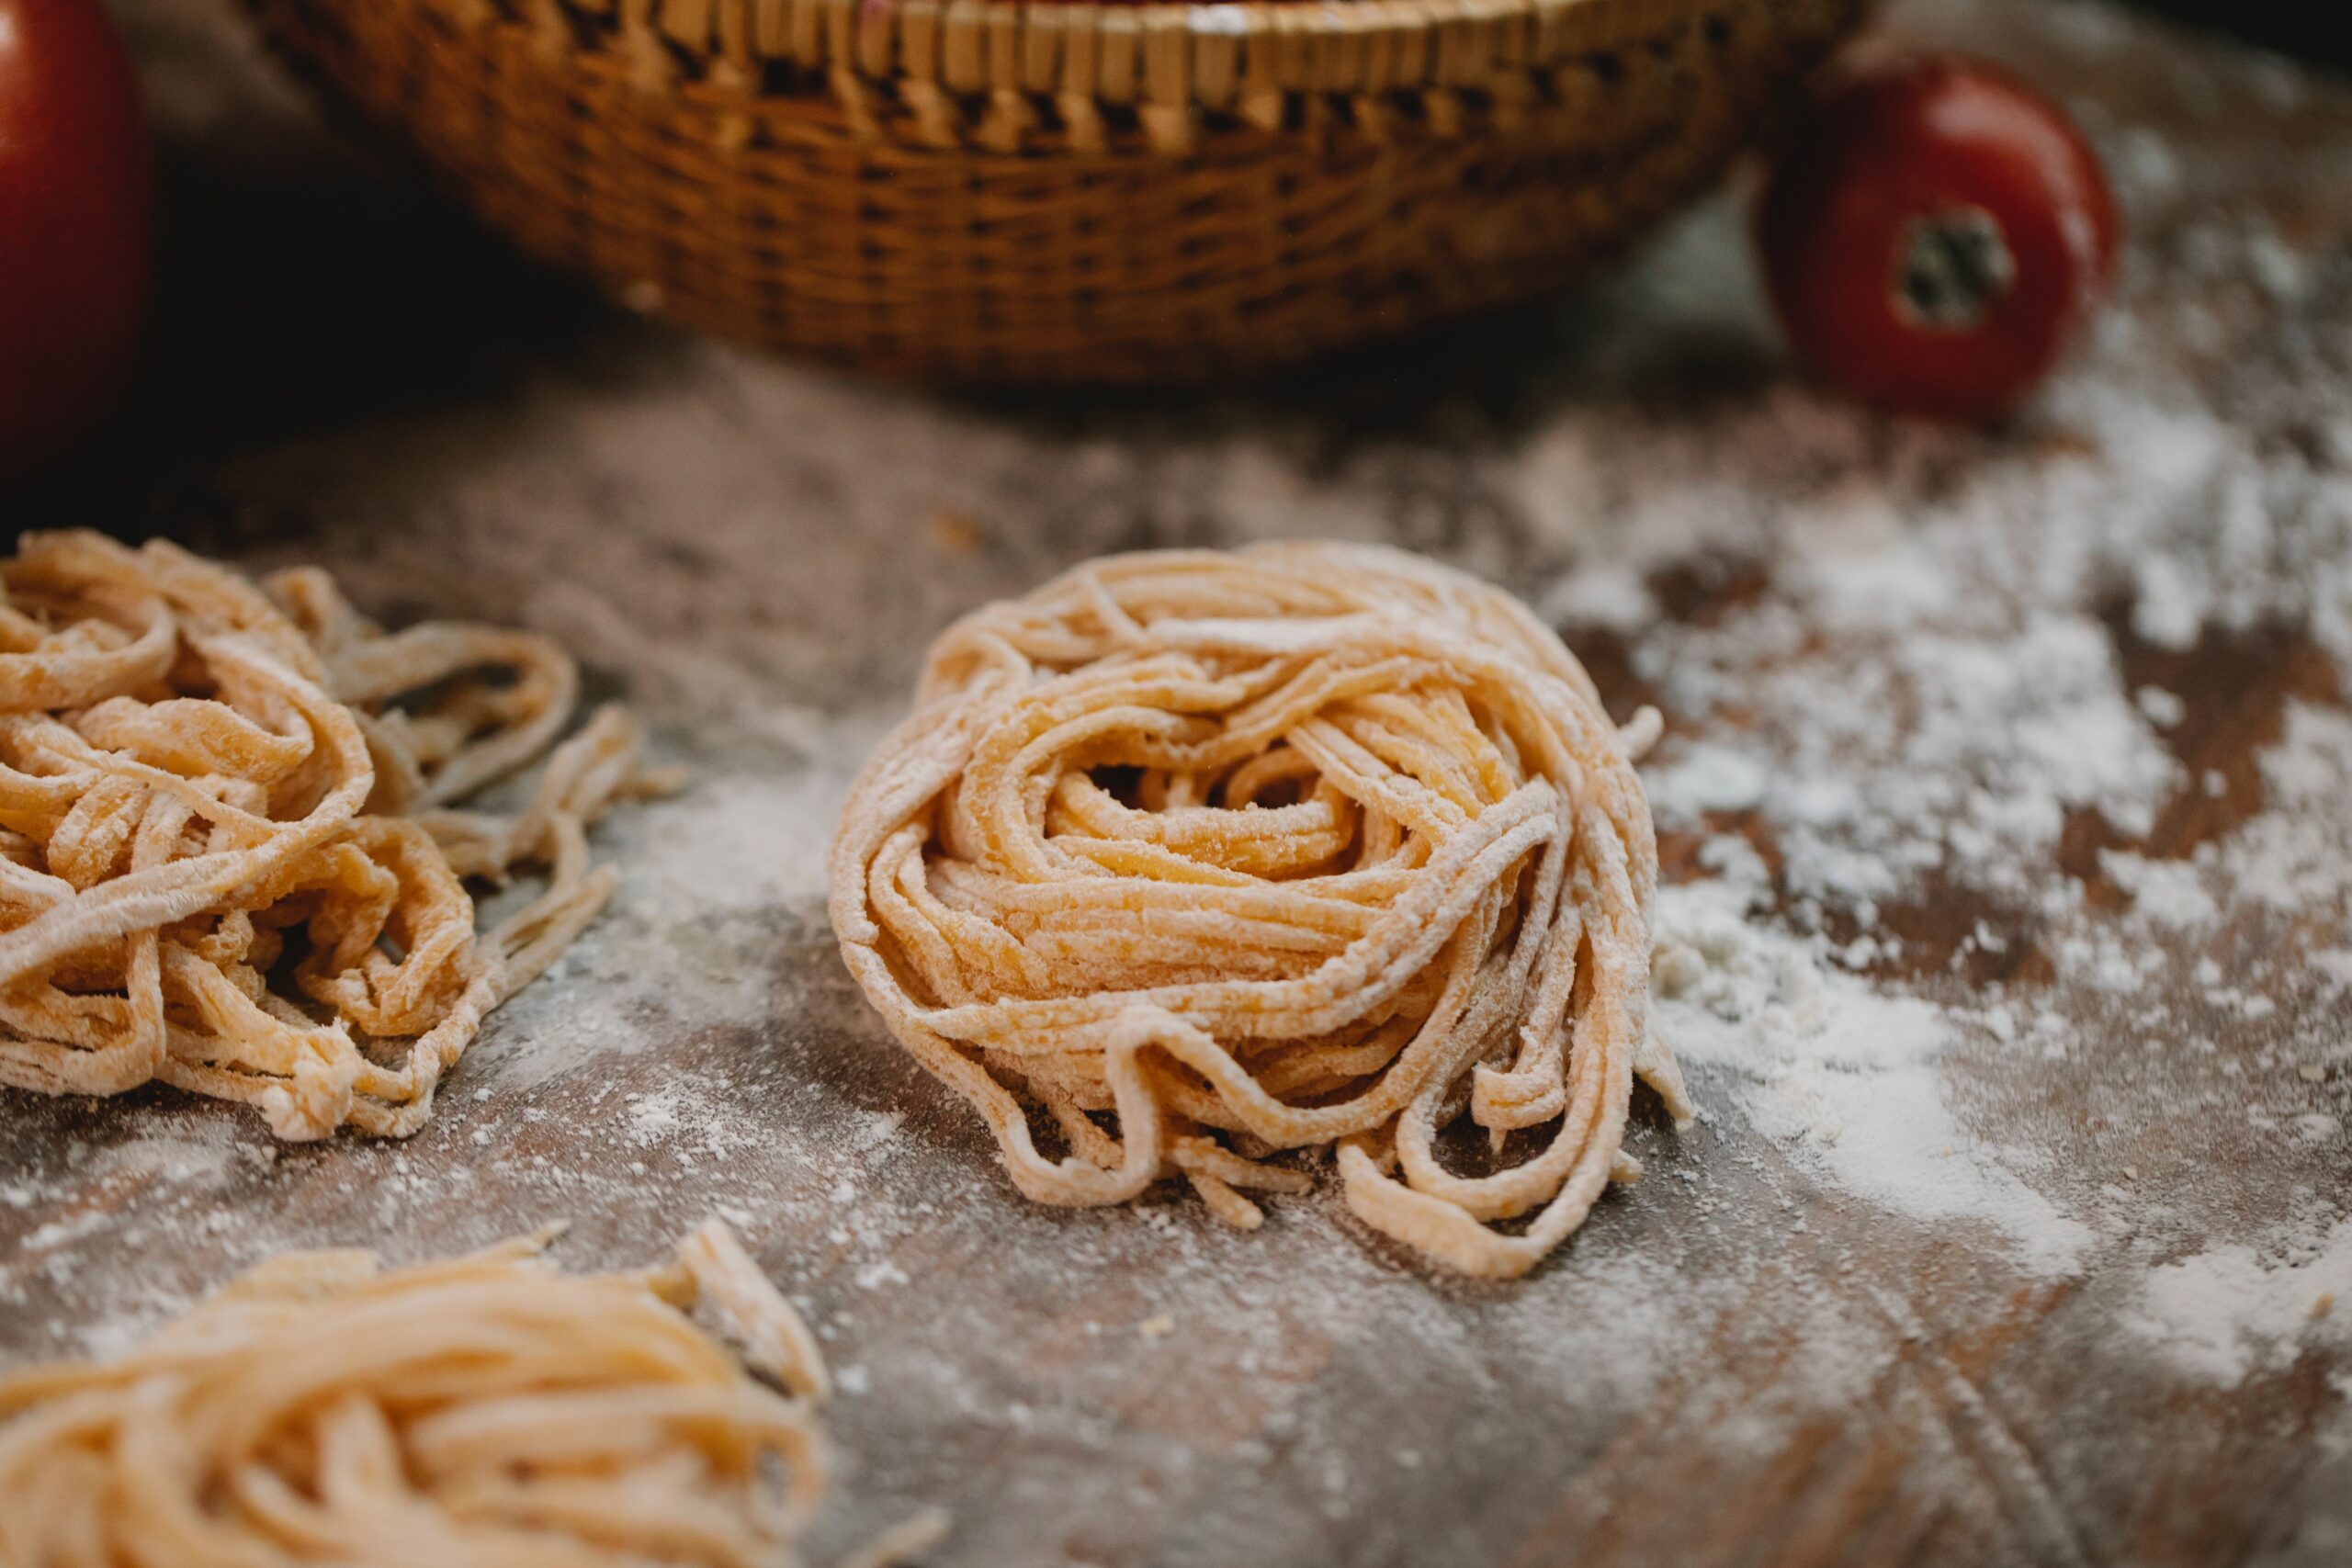 Fresh homemade pasta nest on a floured wooden surface with tomatoes and a basket in the background.